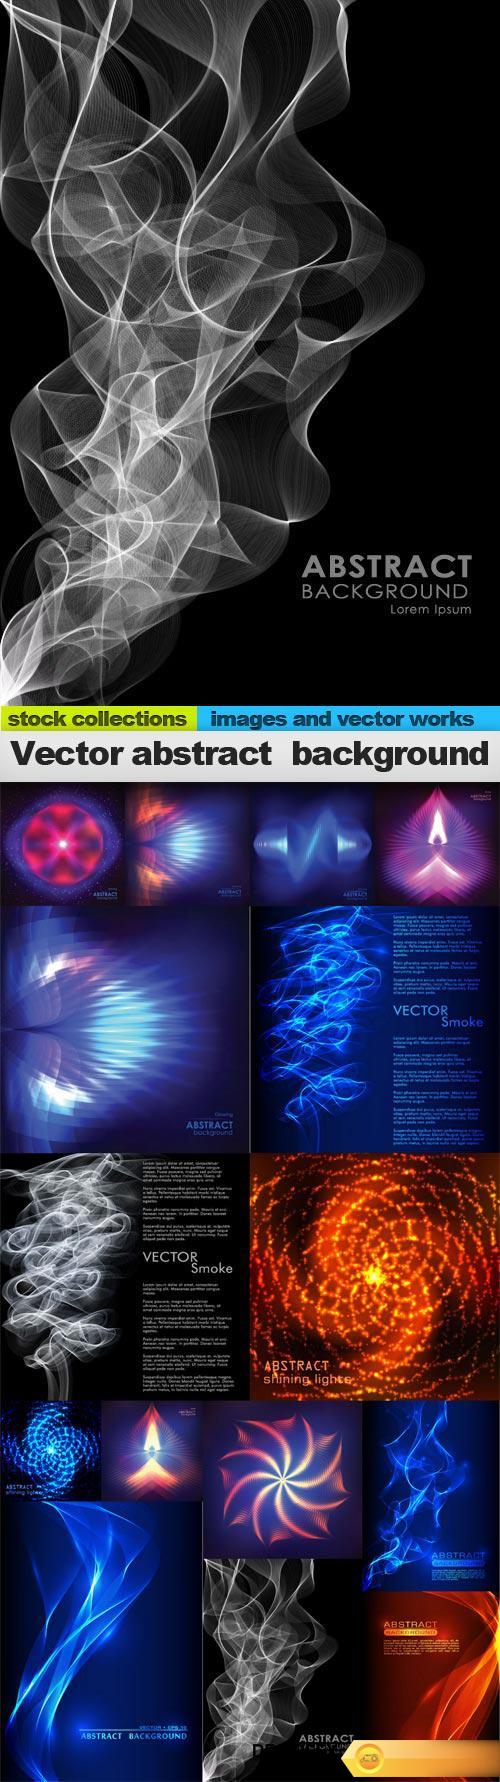 Vector abstract  background, 15 x EPS